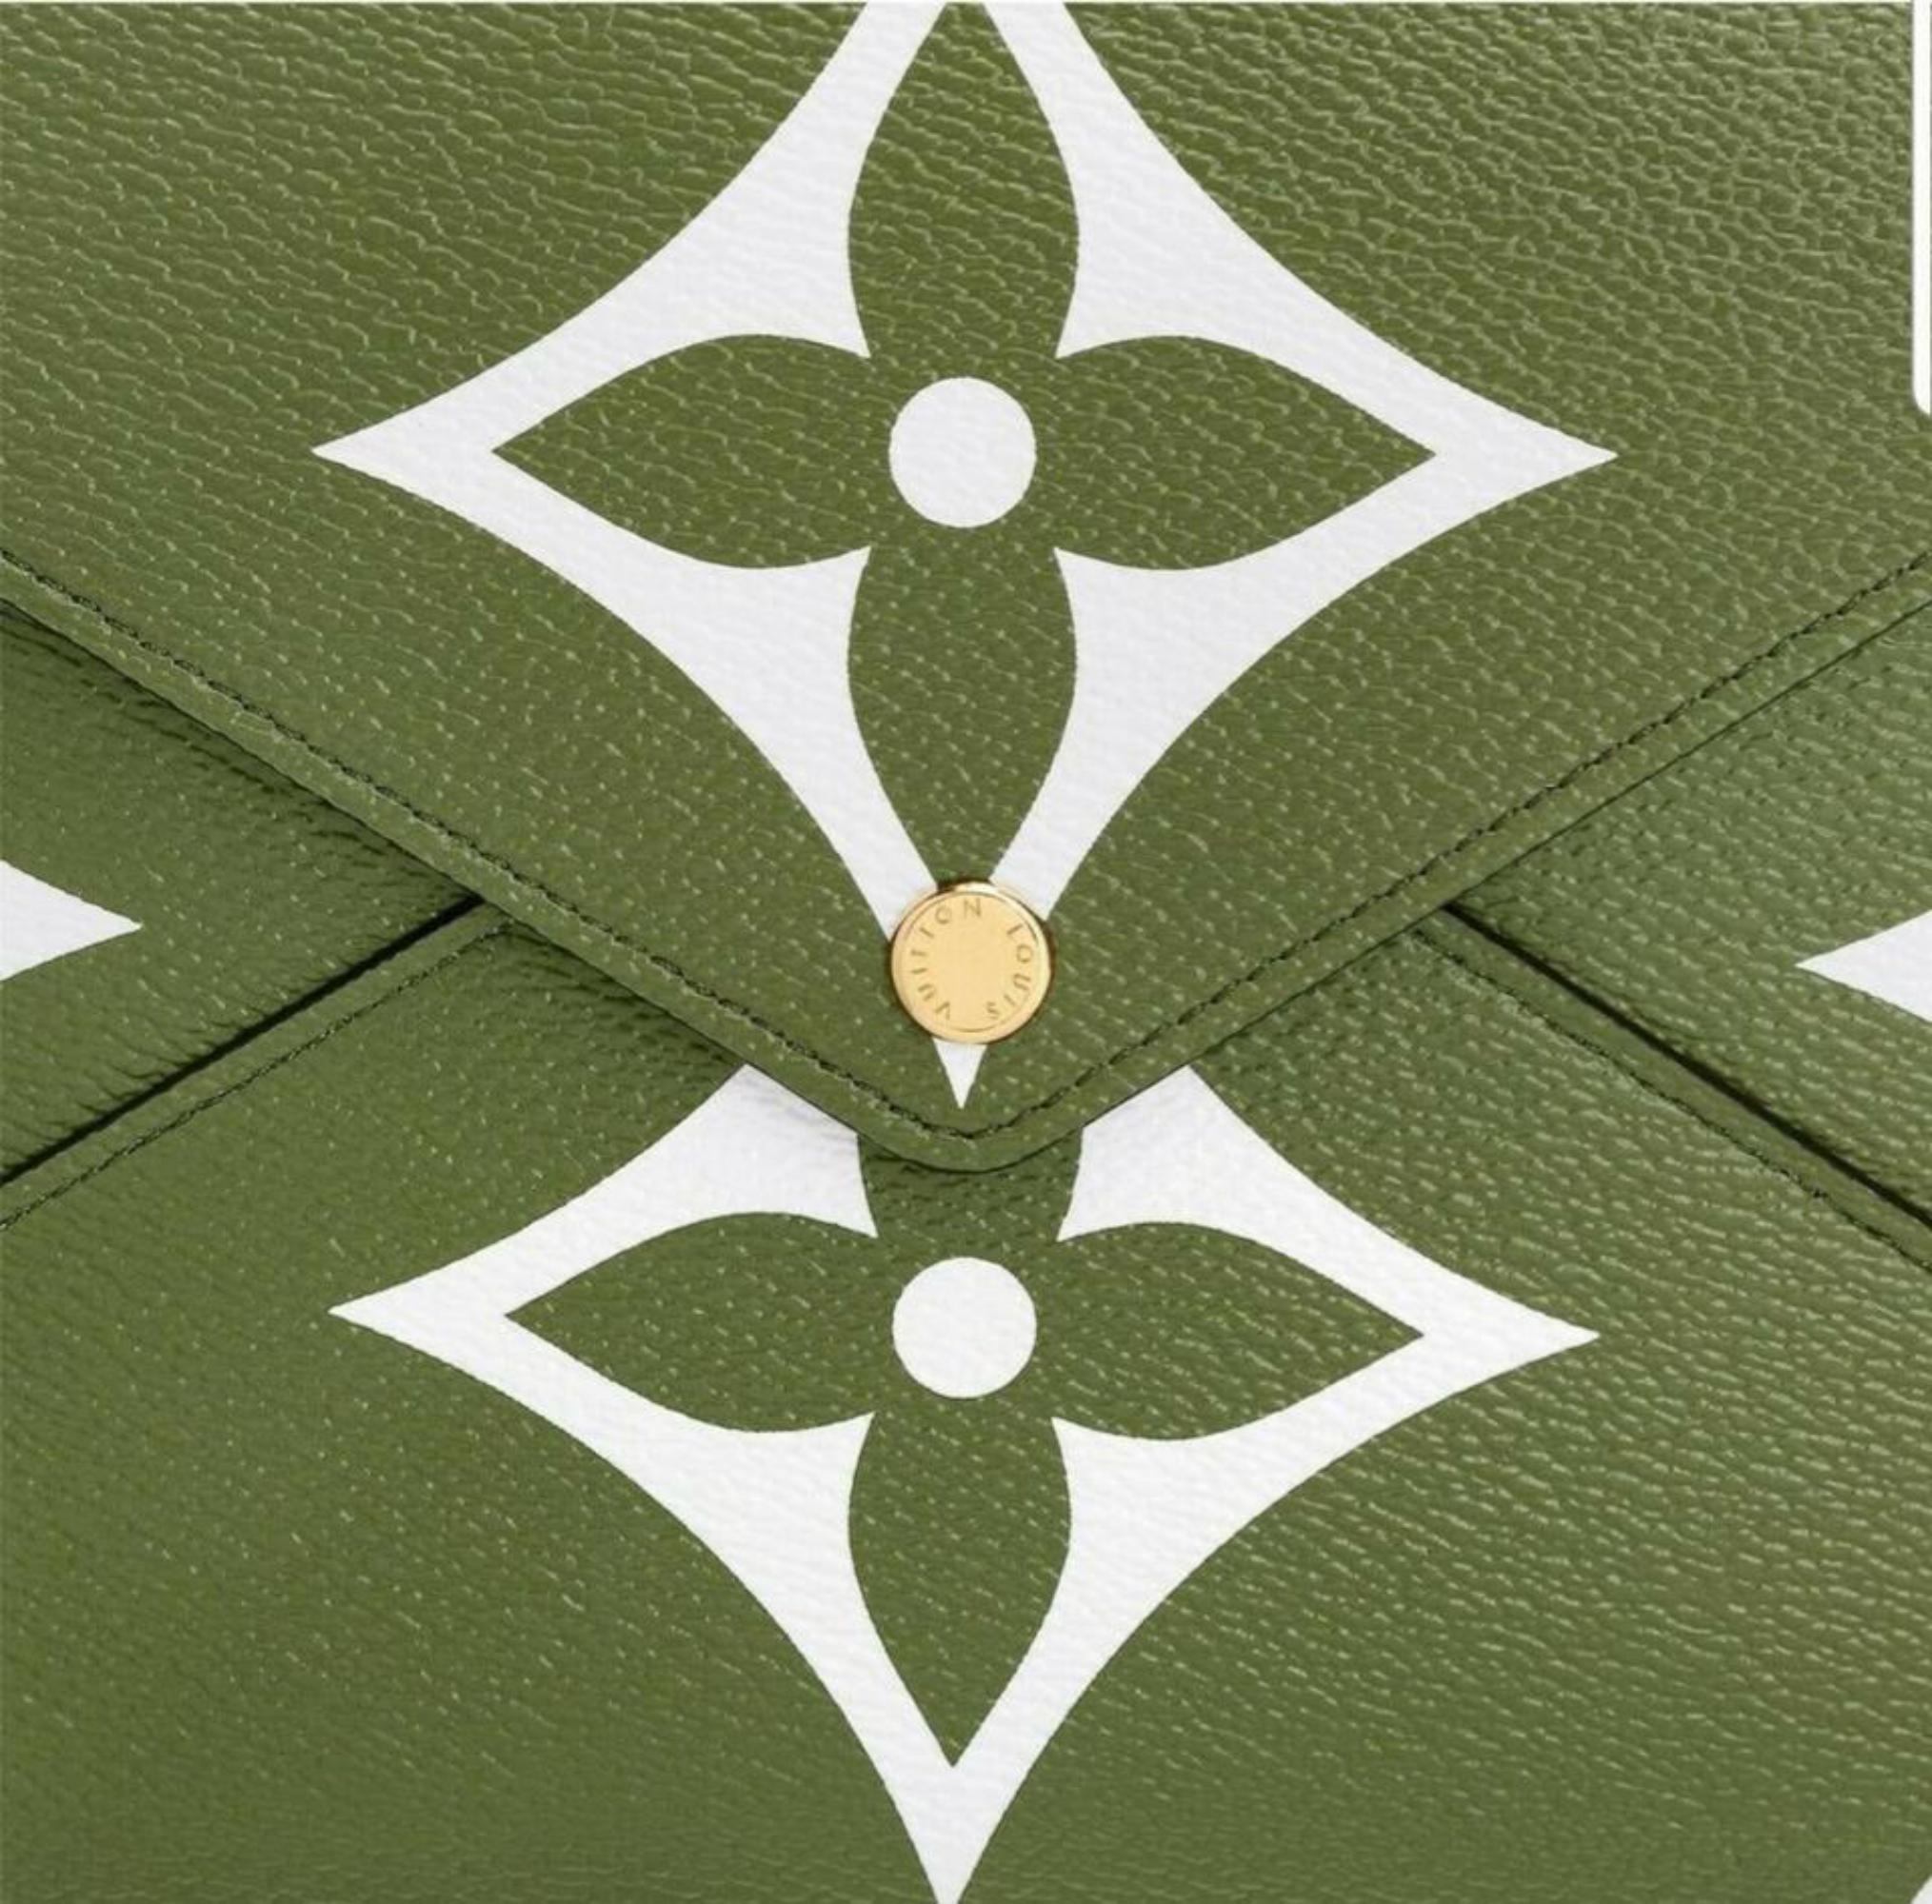 Louis Vuitton Khaki Large Ss19 Limited Edition Giant Kirigami Pouch 870618  For Sale 1